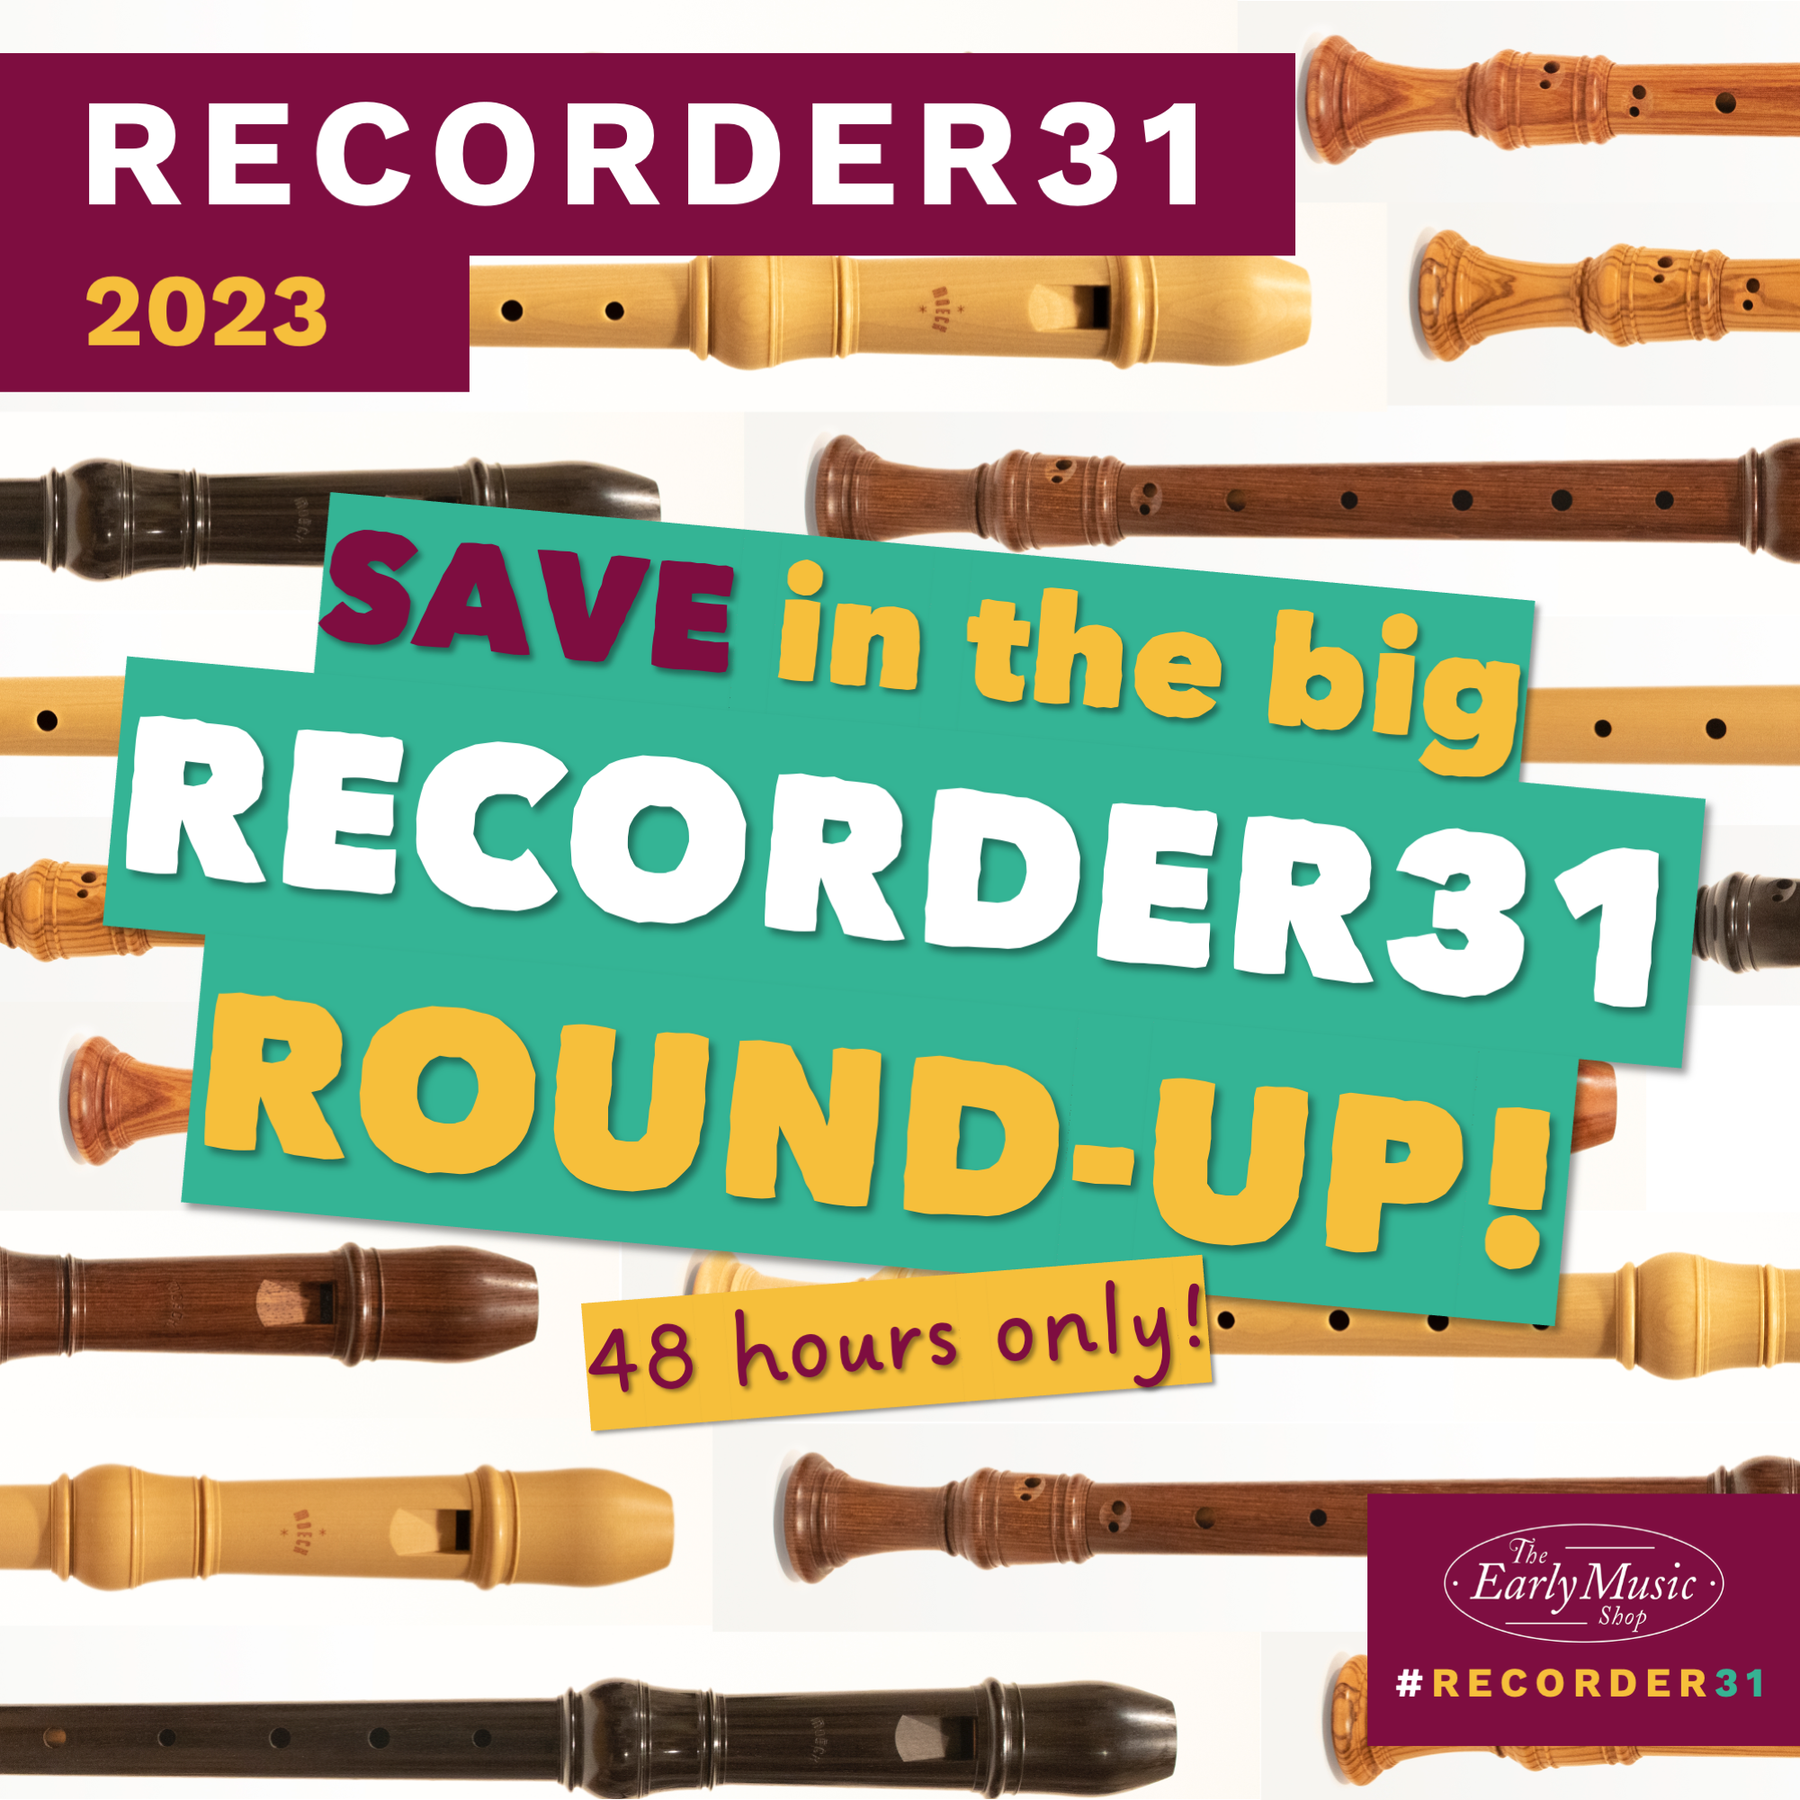 Recorder31 Day 29 | The Big Recorder31 Round-Up!